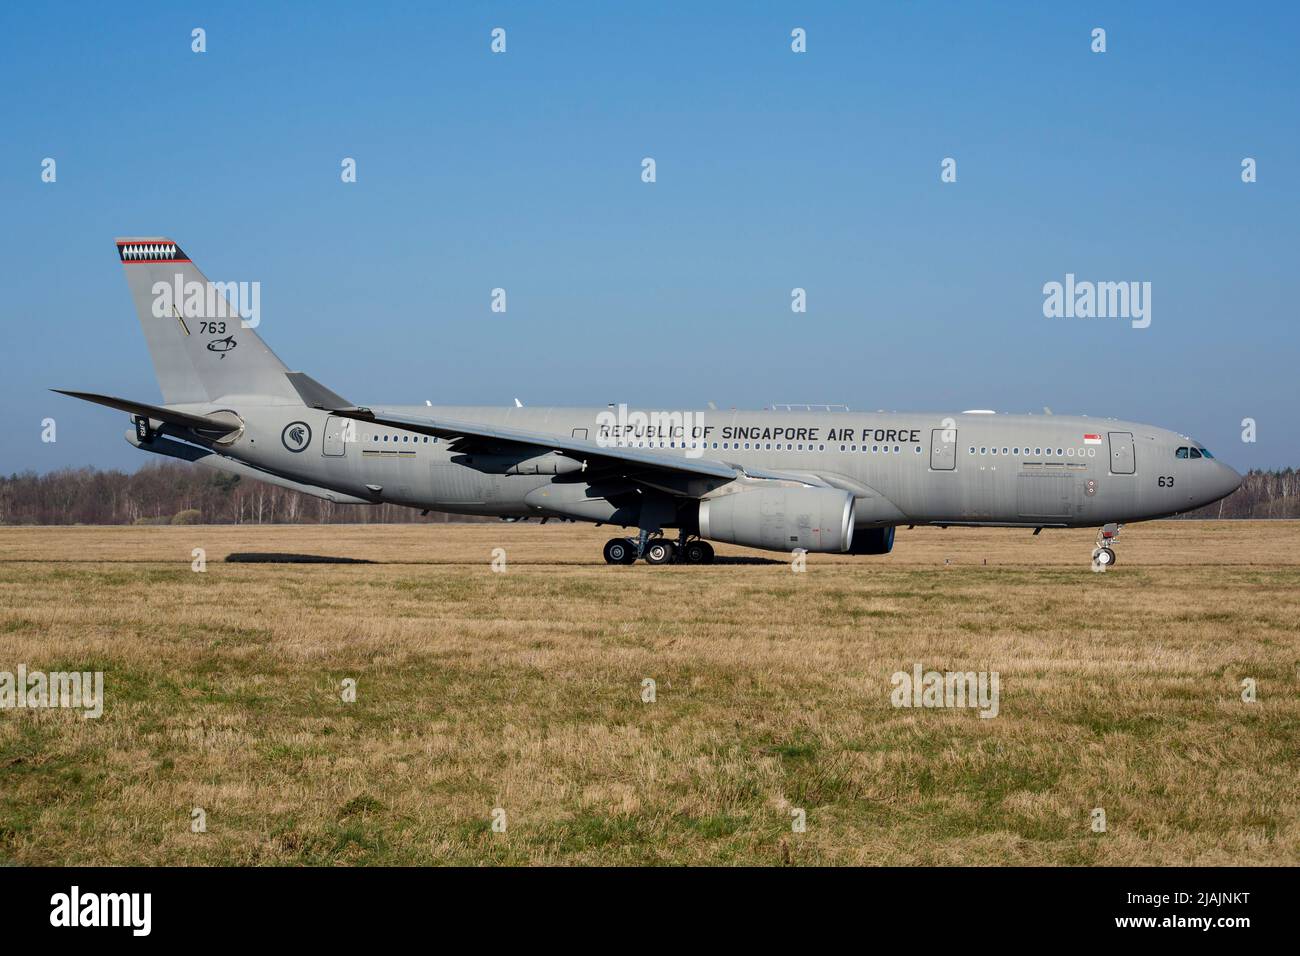 Republic of Singapore Air Force Airbus A330 MRTT tanker aircraft, Dresden, Germany. Stock Photo